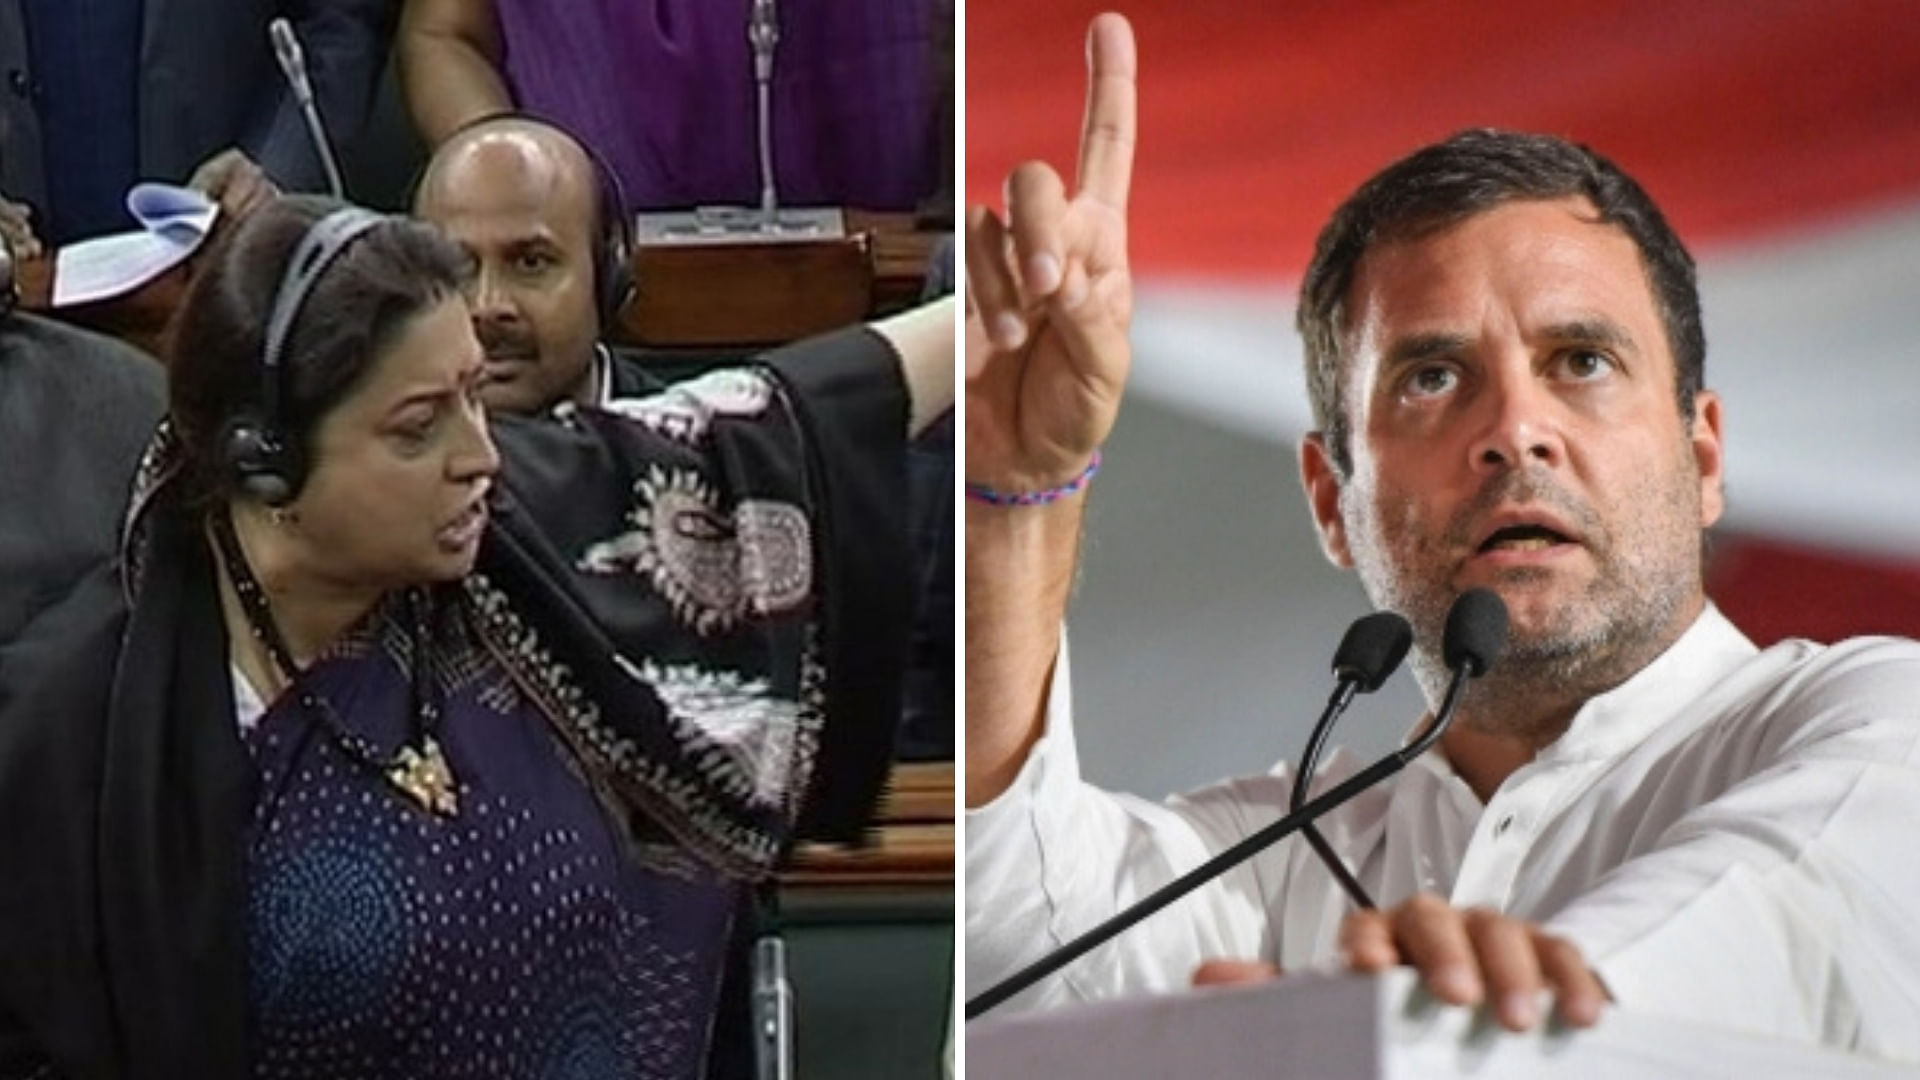 Union Minister Smriti Irani (left) attacked Rahul Gandhi (right) over his ‘Rape-in-India’ remark at a rally in Jharkhand.